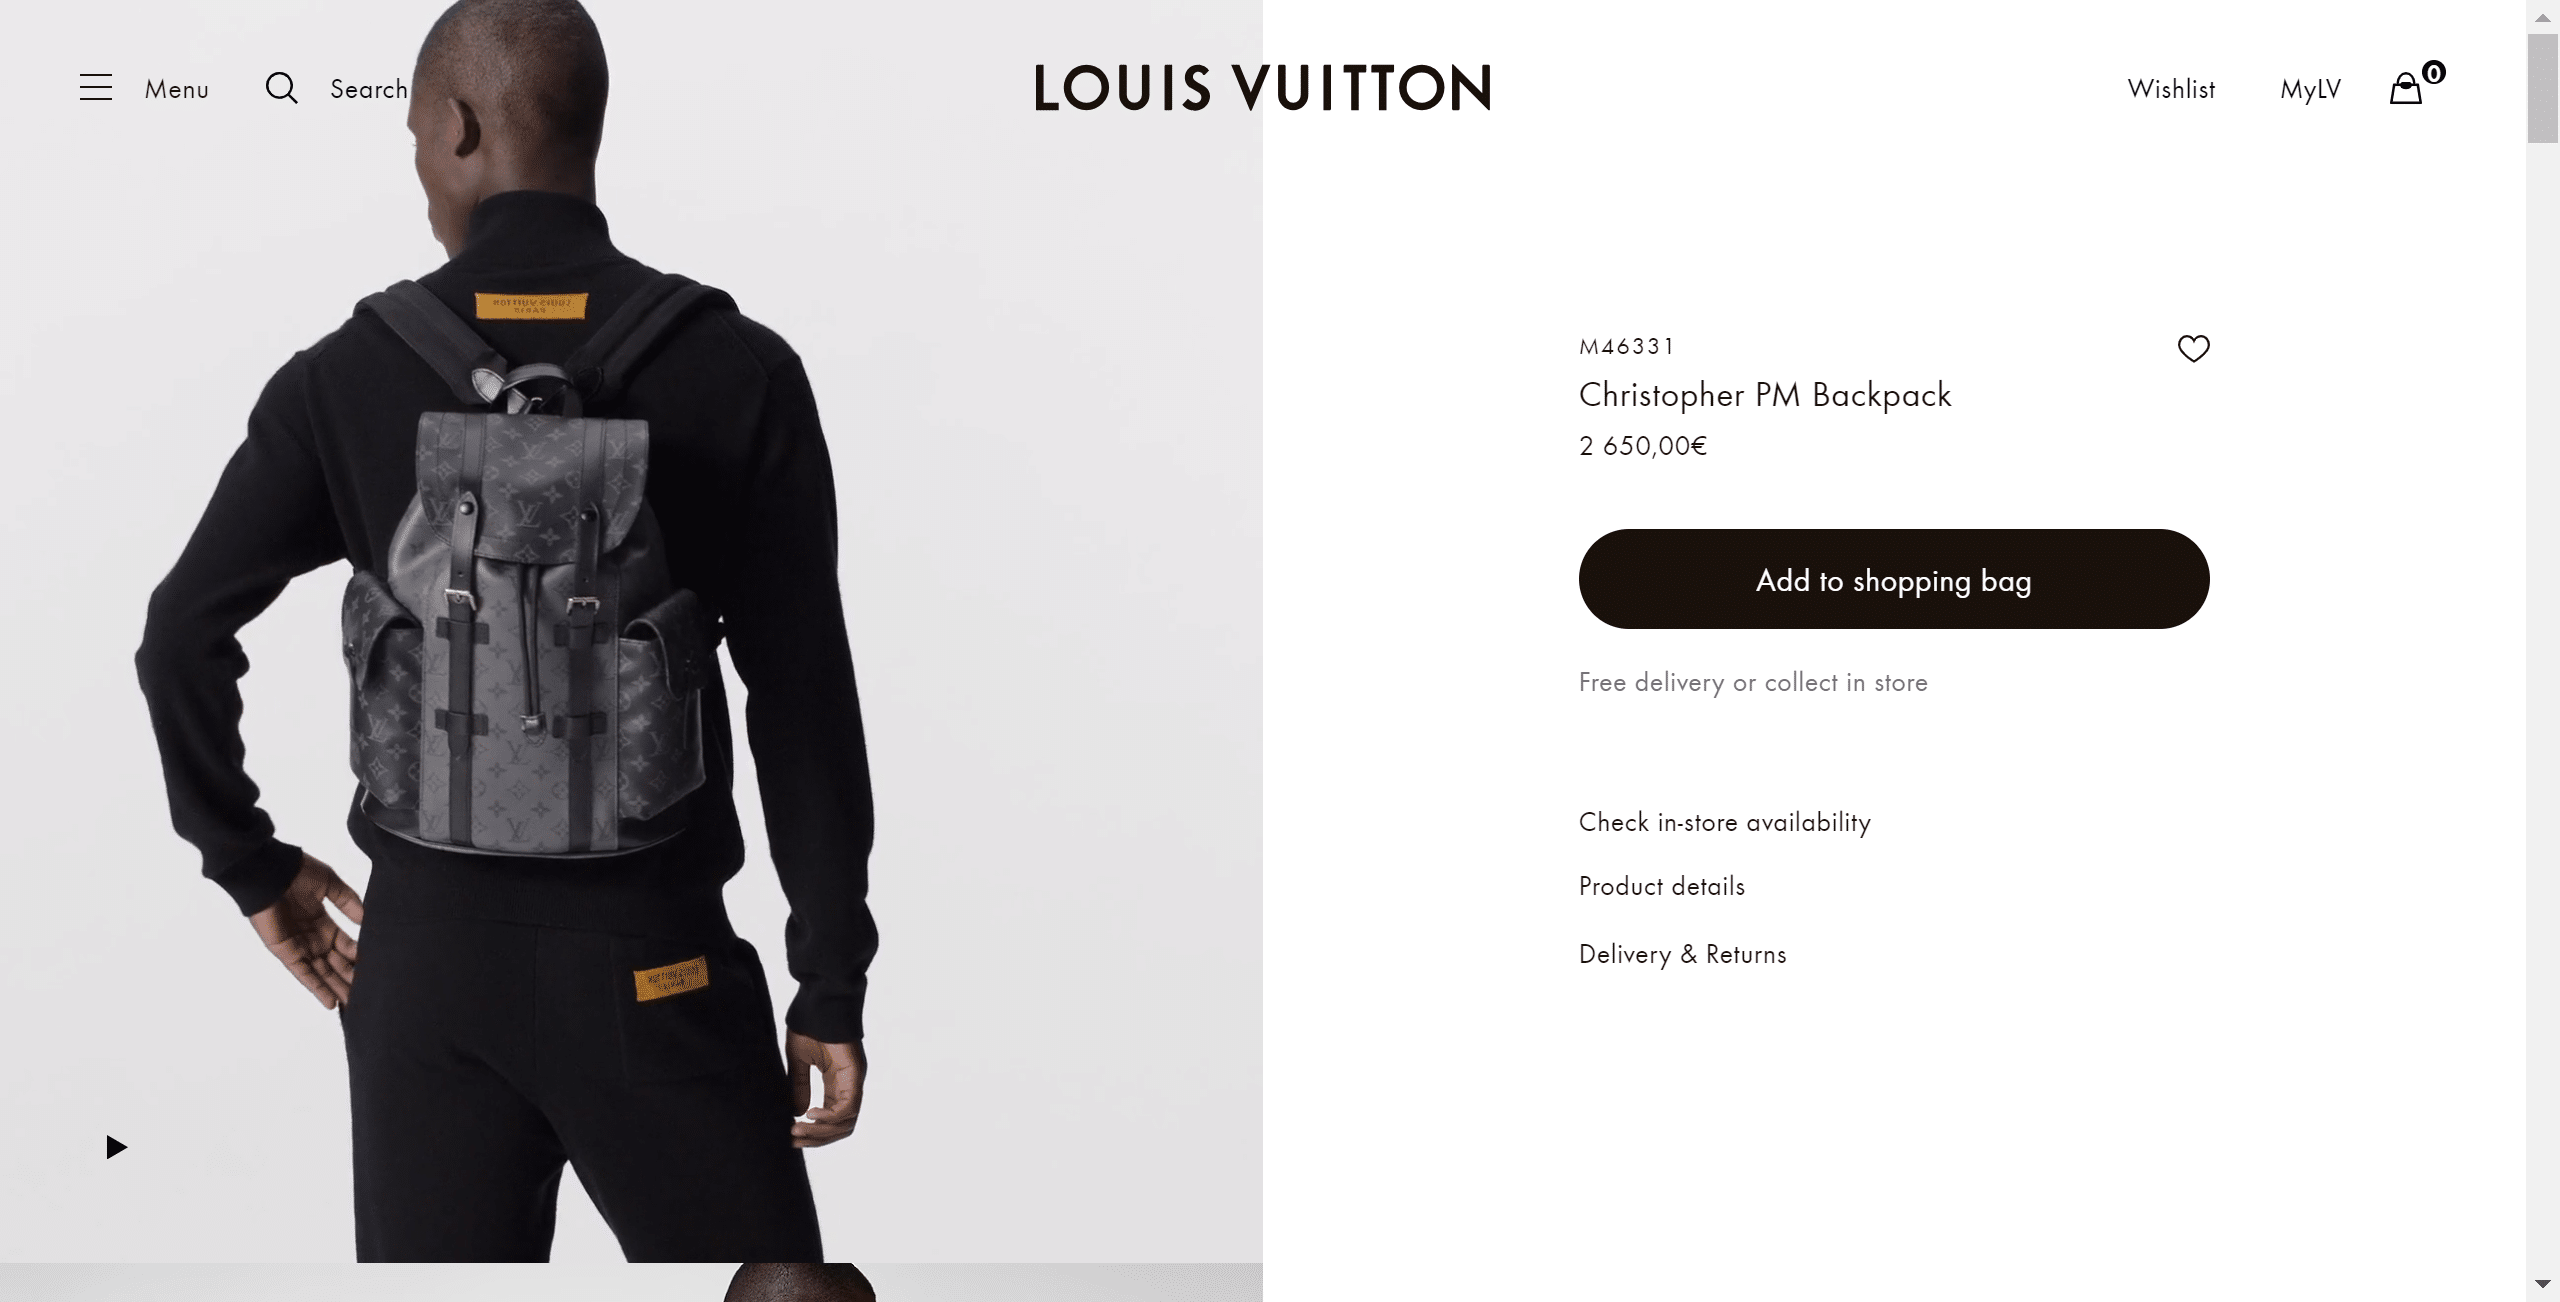 Christopher-PM-Backpack-Monogram-Eclipse-Bags-M46331-LOUIS-VUITTON.png